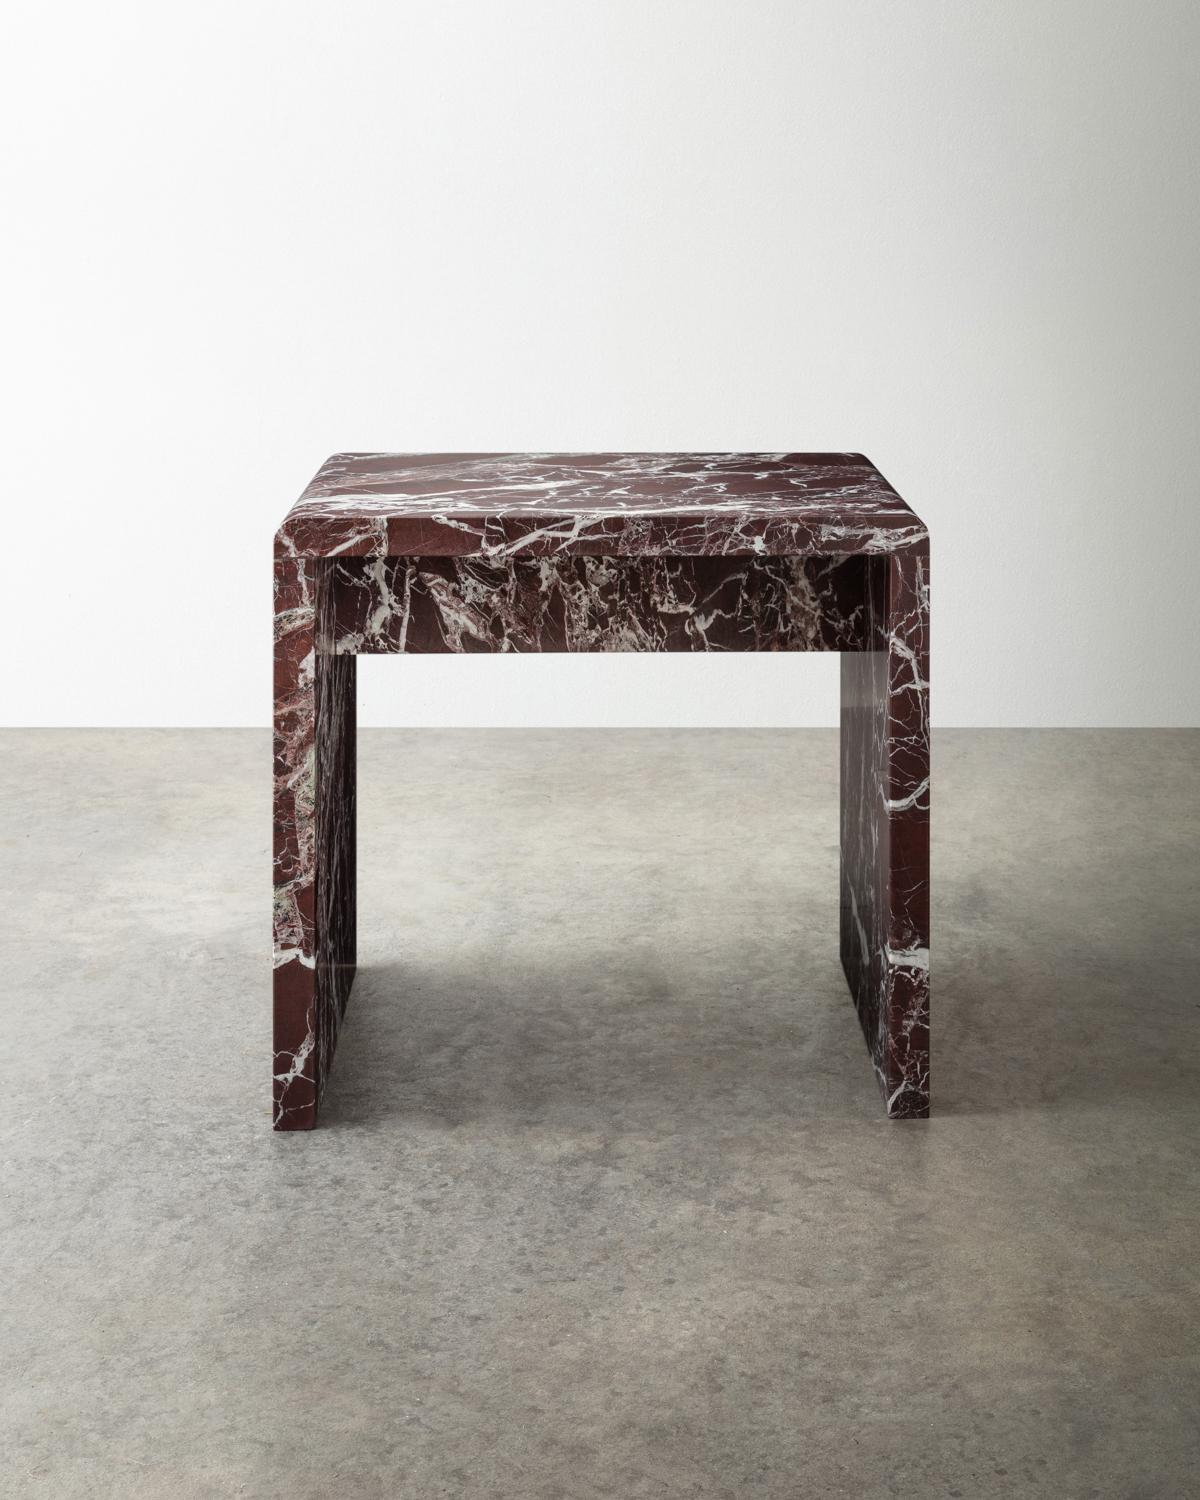 American Craftsman Japanese Jointed Marble Sculptural Stool / Side Table For Sale